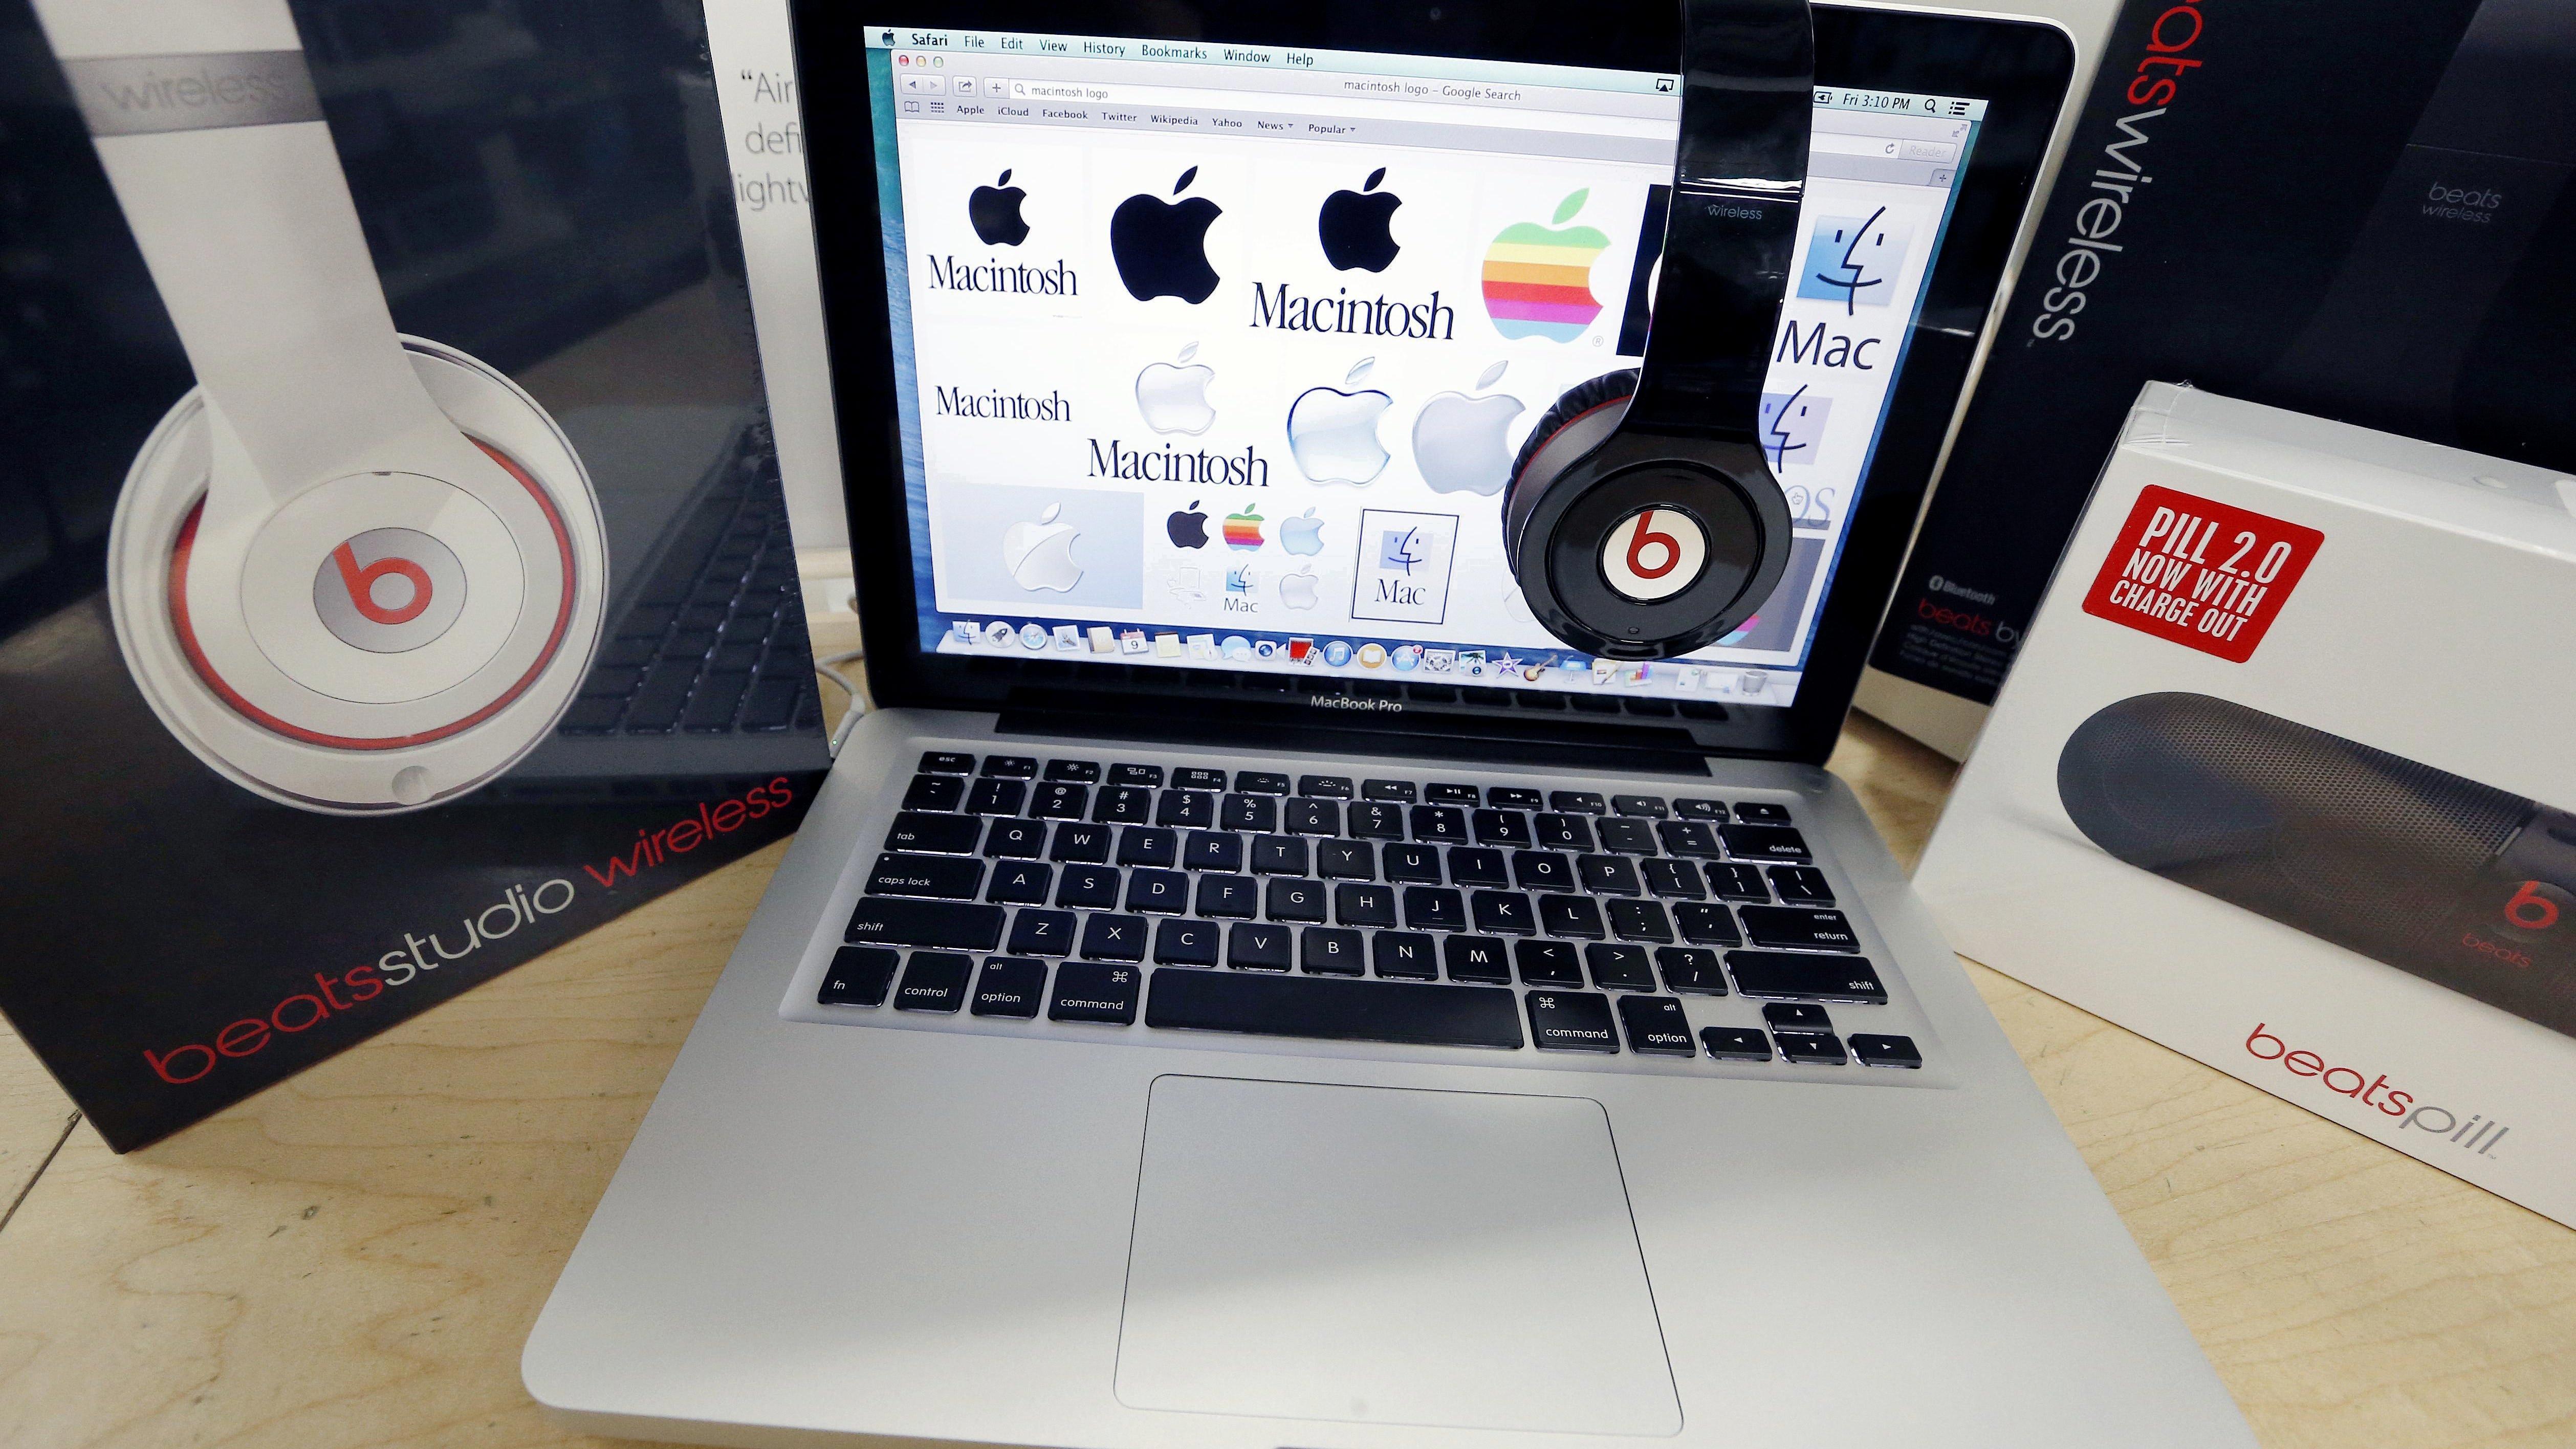 Are Macbooks still coming with Beats? 13